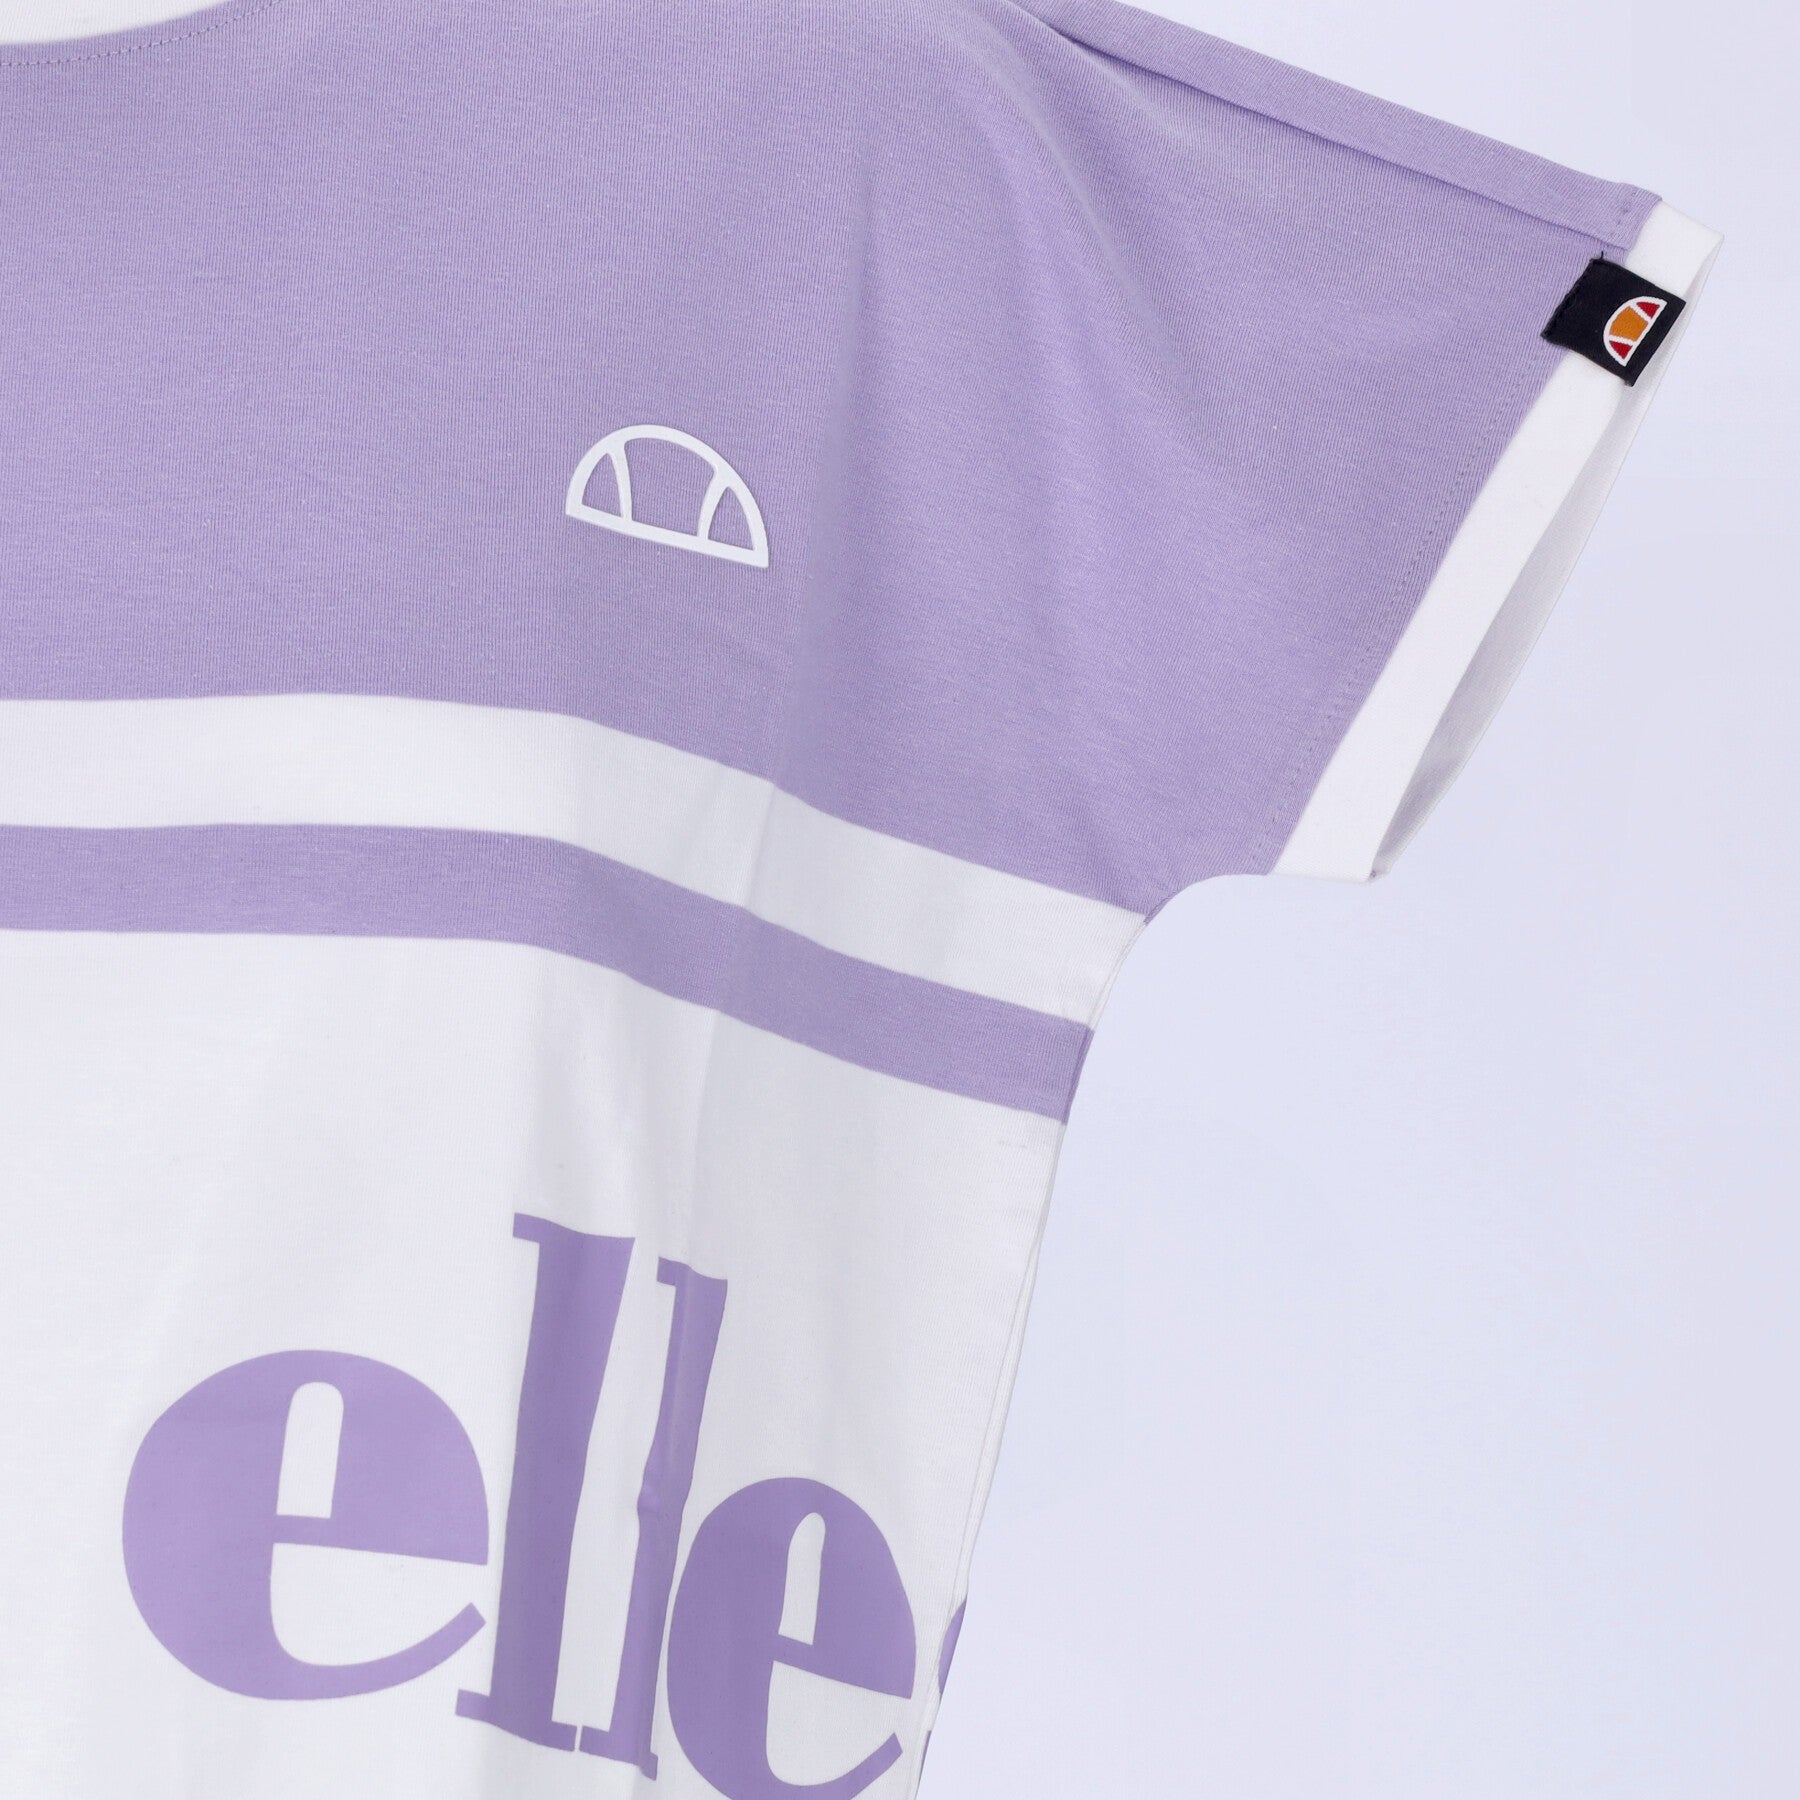 Lavender Tee Women's Cropped T-Shirt